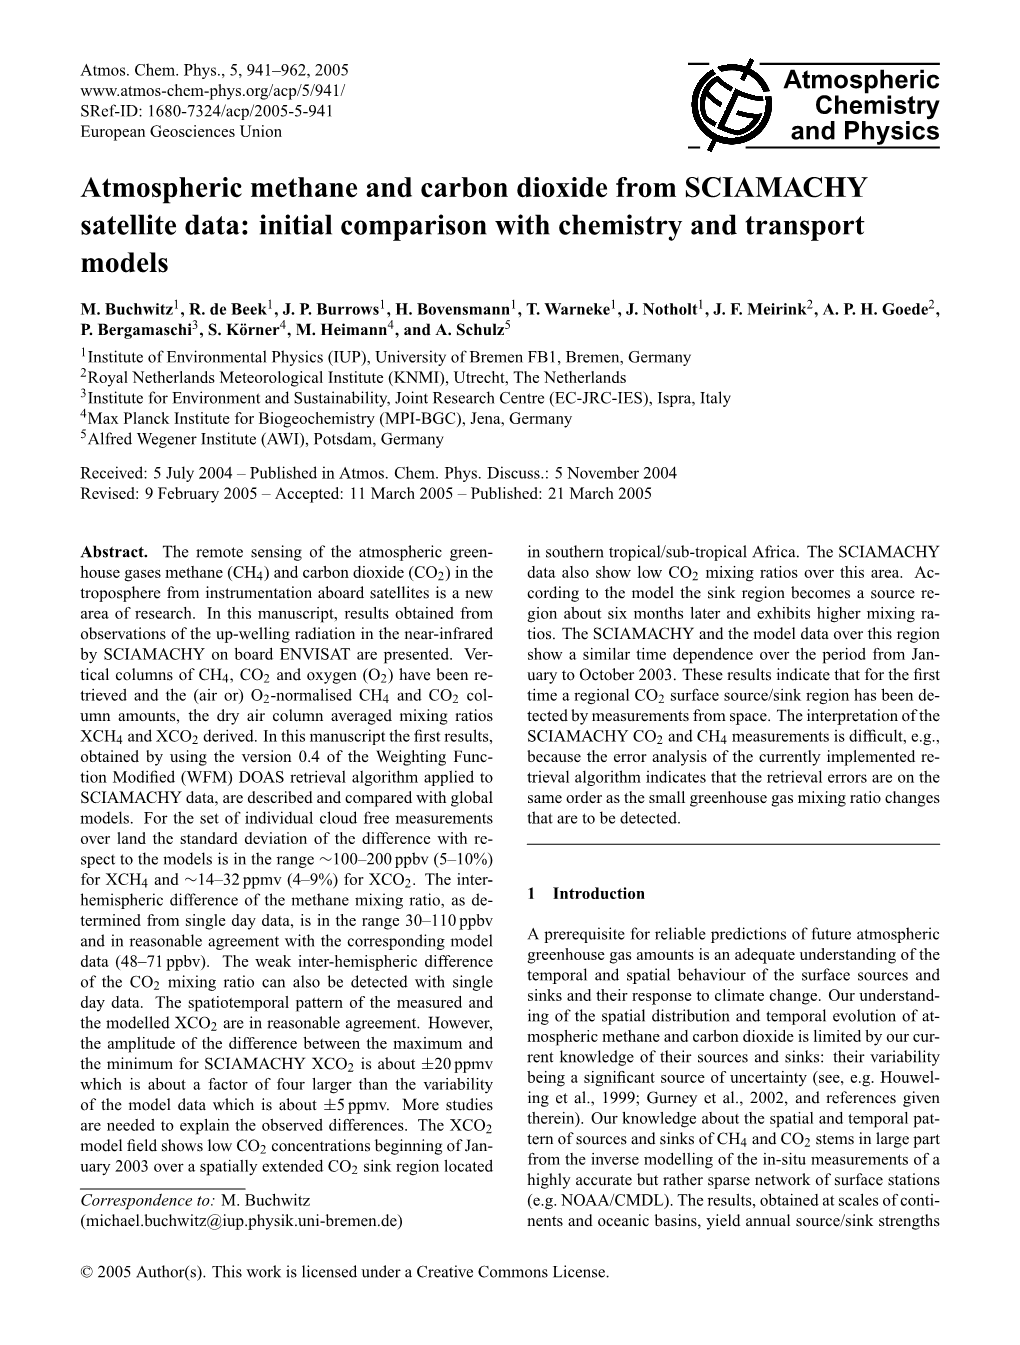 Atmospheric Methane and Carbon Dioxide from SCIAMACHY Satellite Data: Initial Comparison with Chemistry and Transport Models